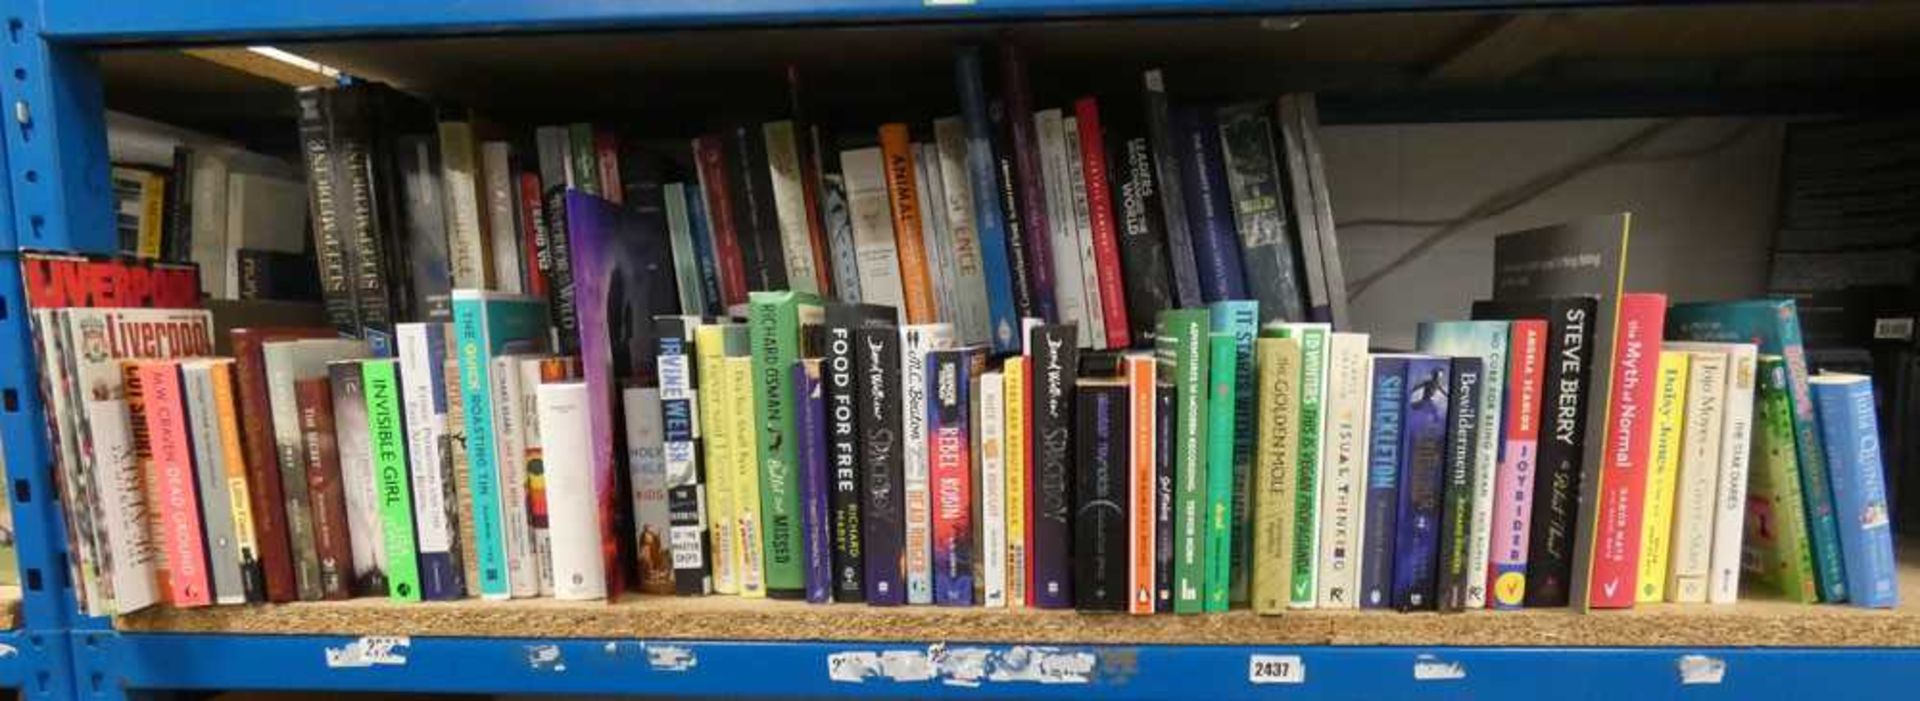 Selection of hardback and paperback novels, books and reference materials